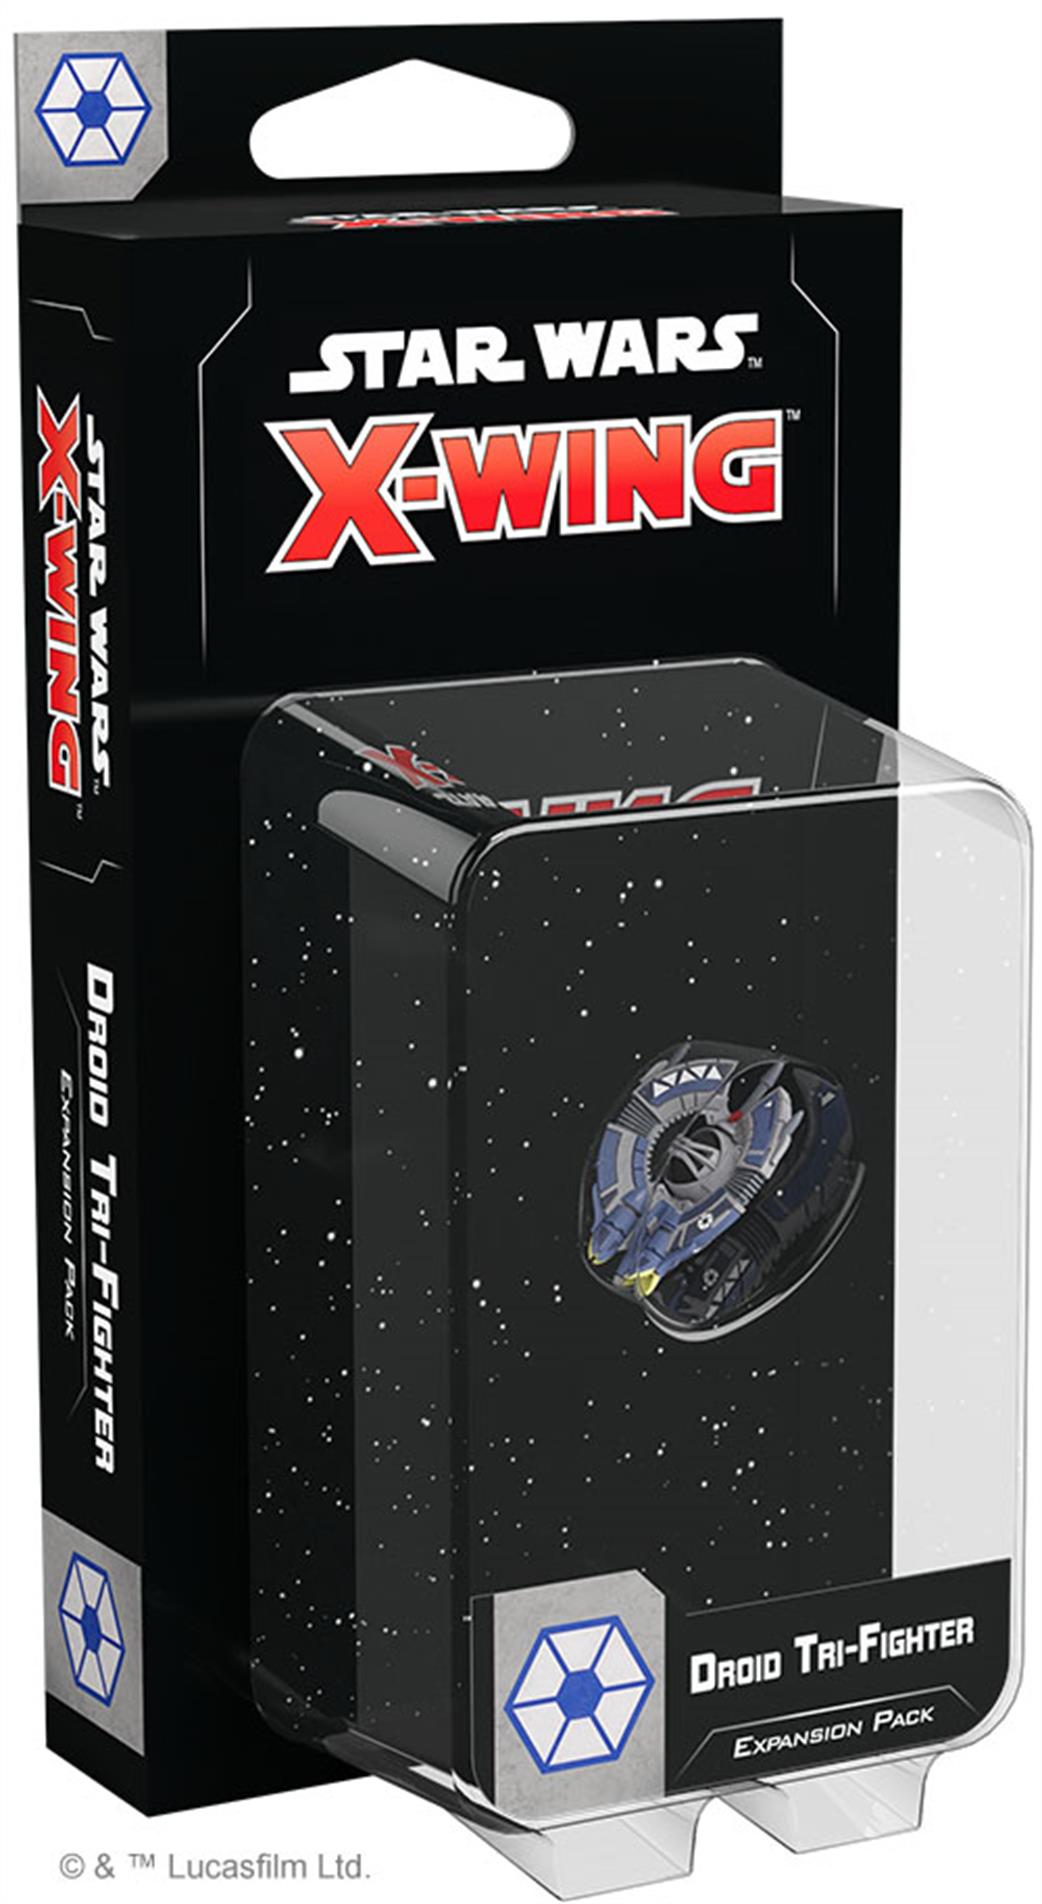 Fantasy Flight Games  SWZ81 Droid Tri-Fighter Expansion Pack from Star Wars X-Wing 2nd Ed